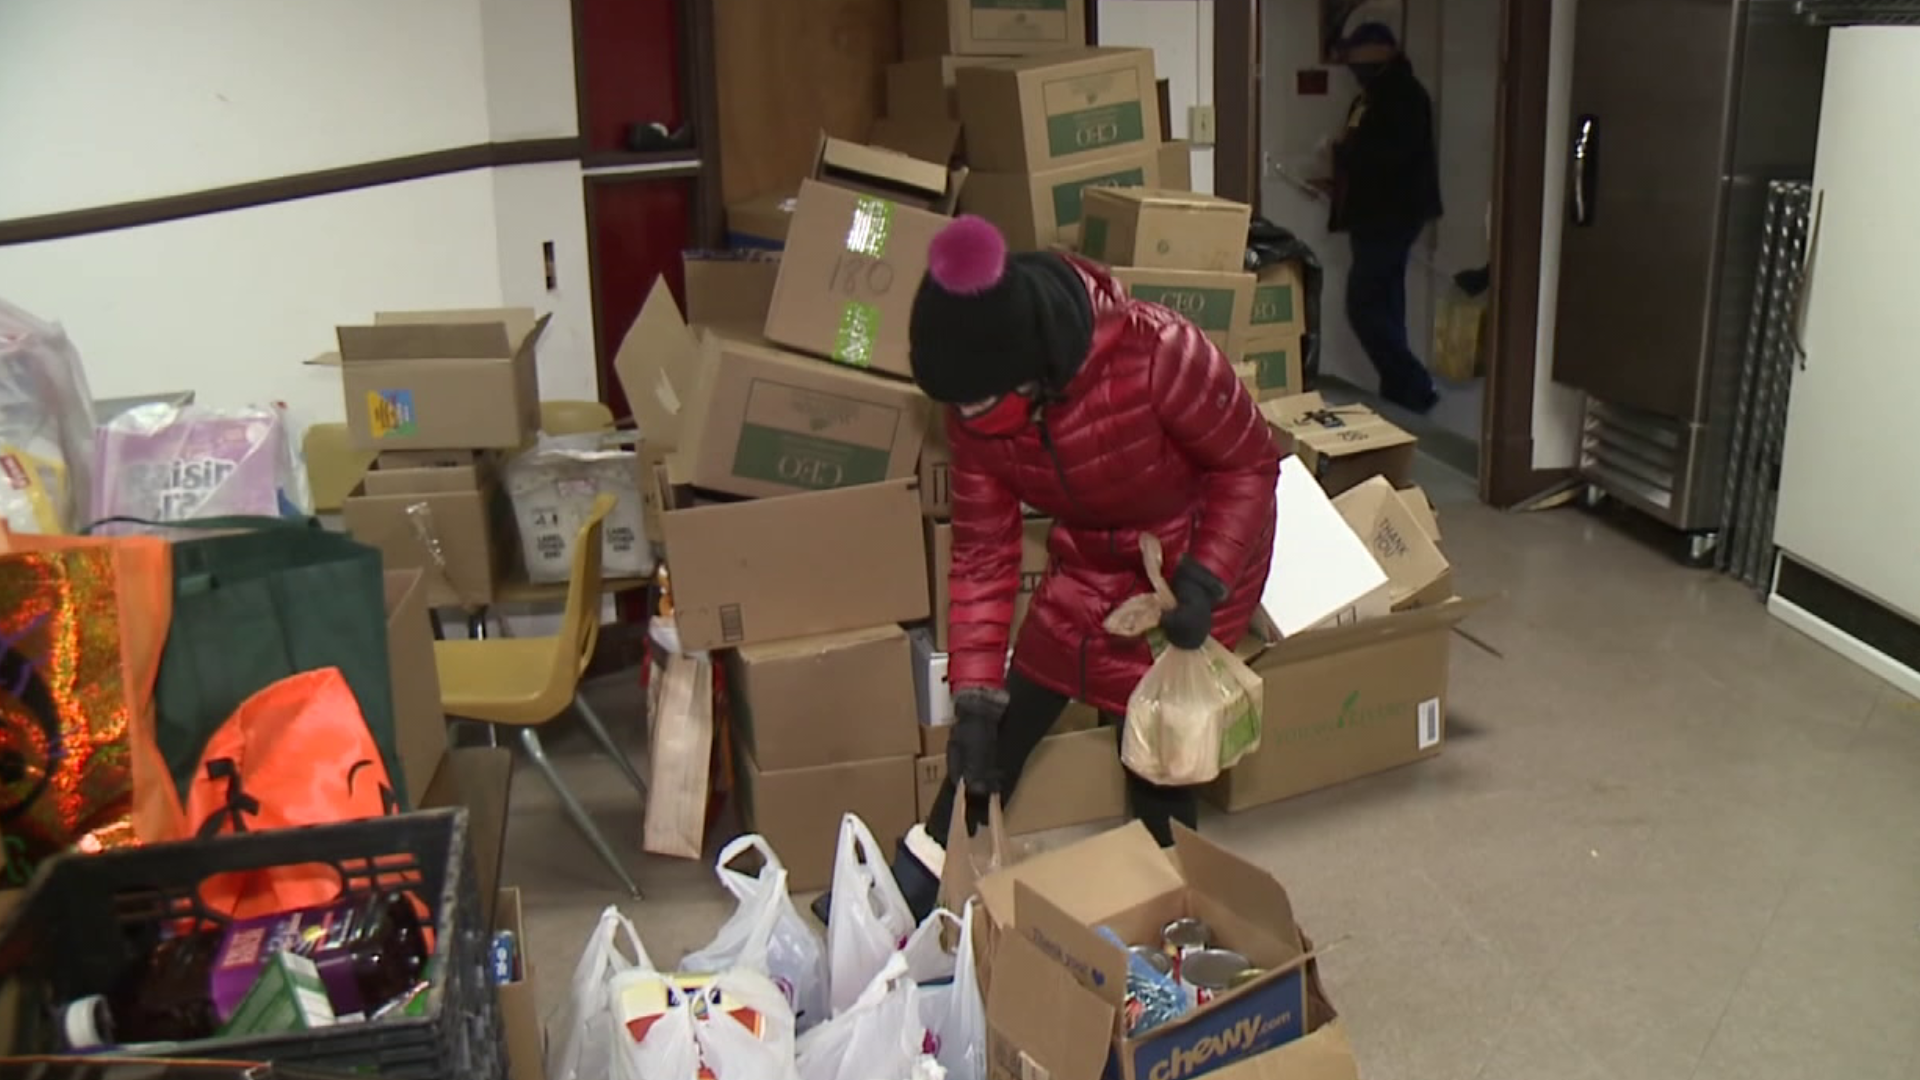 Nanticoke Food Pantry say over 4,500 items have been donated along with monetary donations.